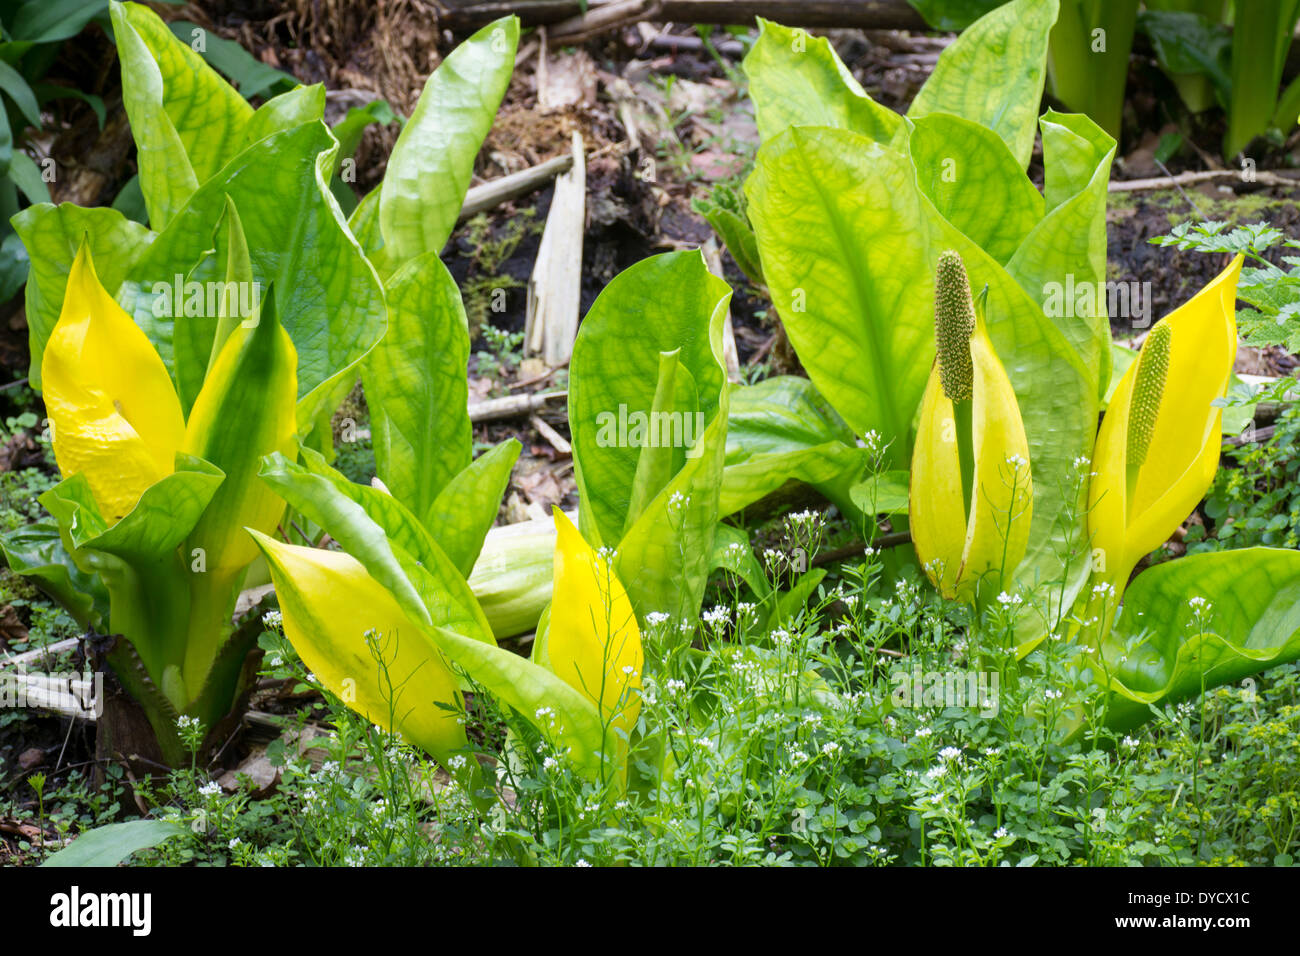 Yellow spathes and emergent foliage of the western skunk cabbage, Lysichiton americanus Stock Photo